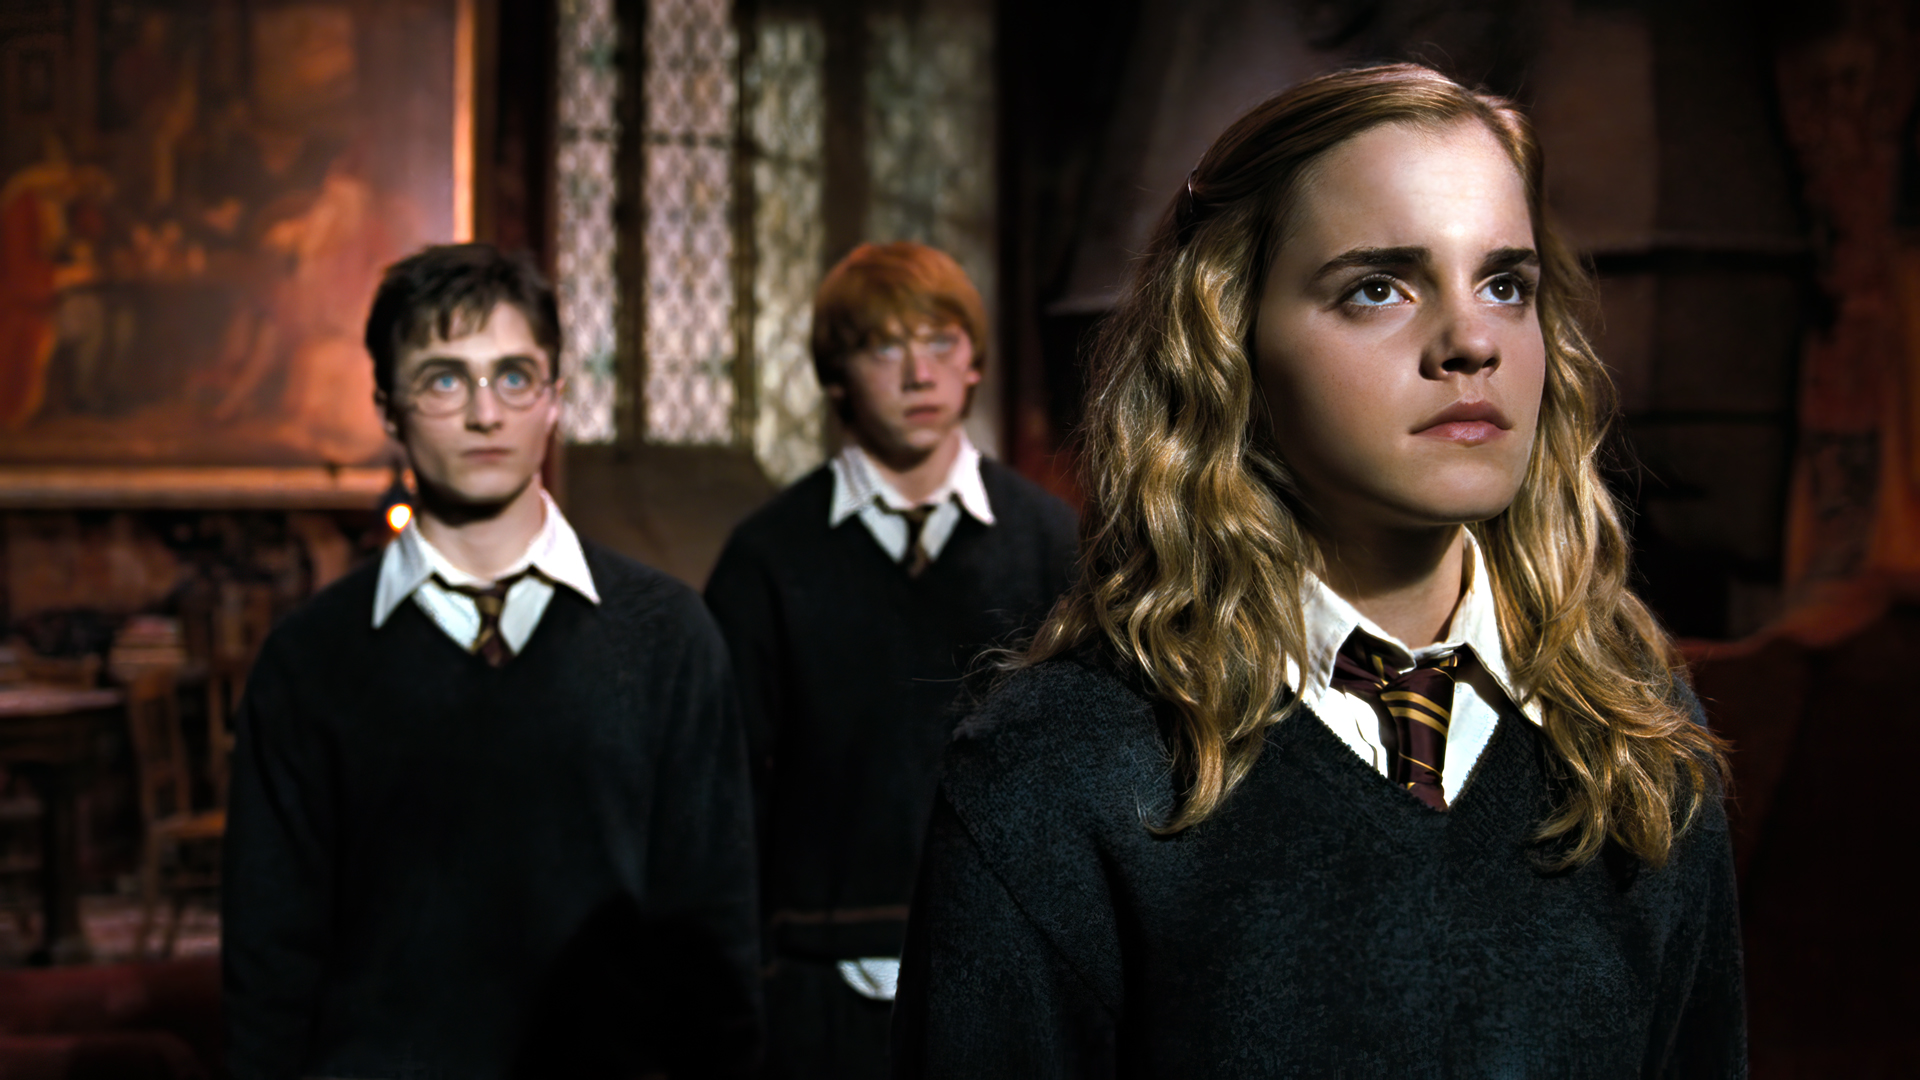 Harry Potter And The Order Of The Phoenix Harry Potter J K Rowling Hermione Granger Ron Weasley Dani 1920x1080